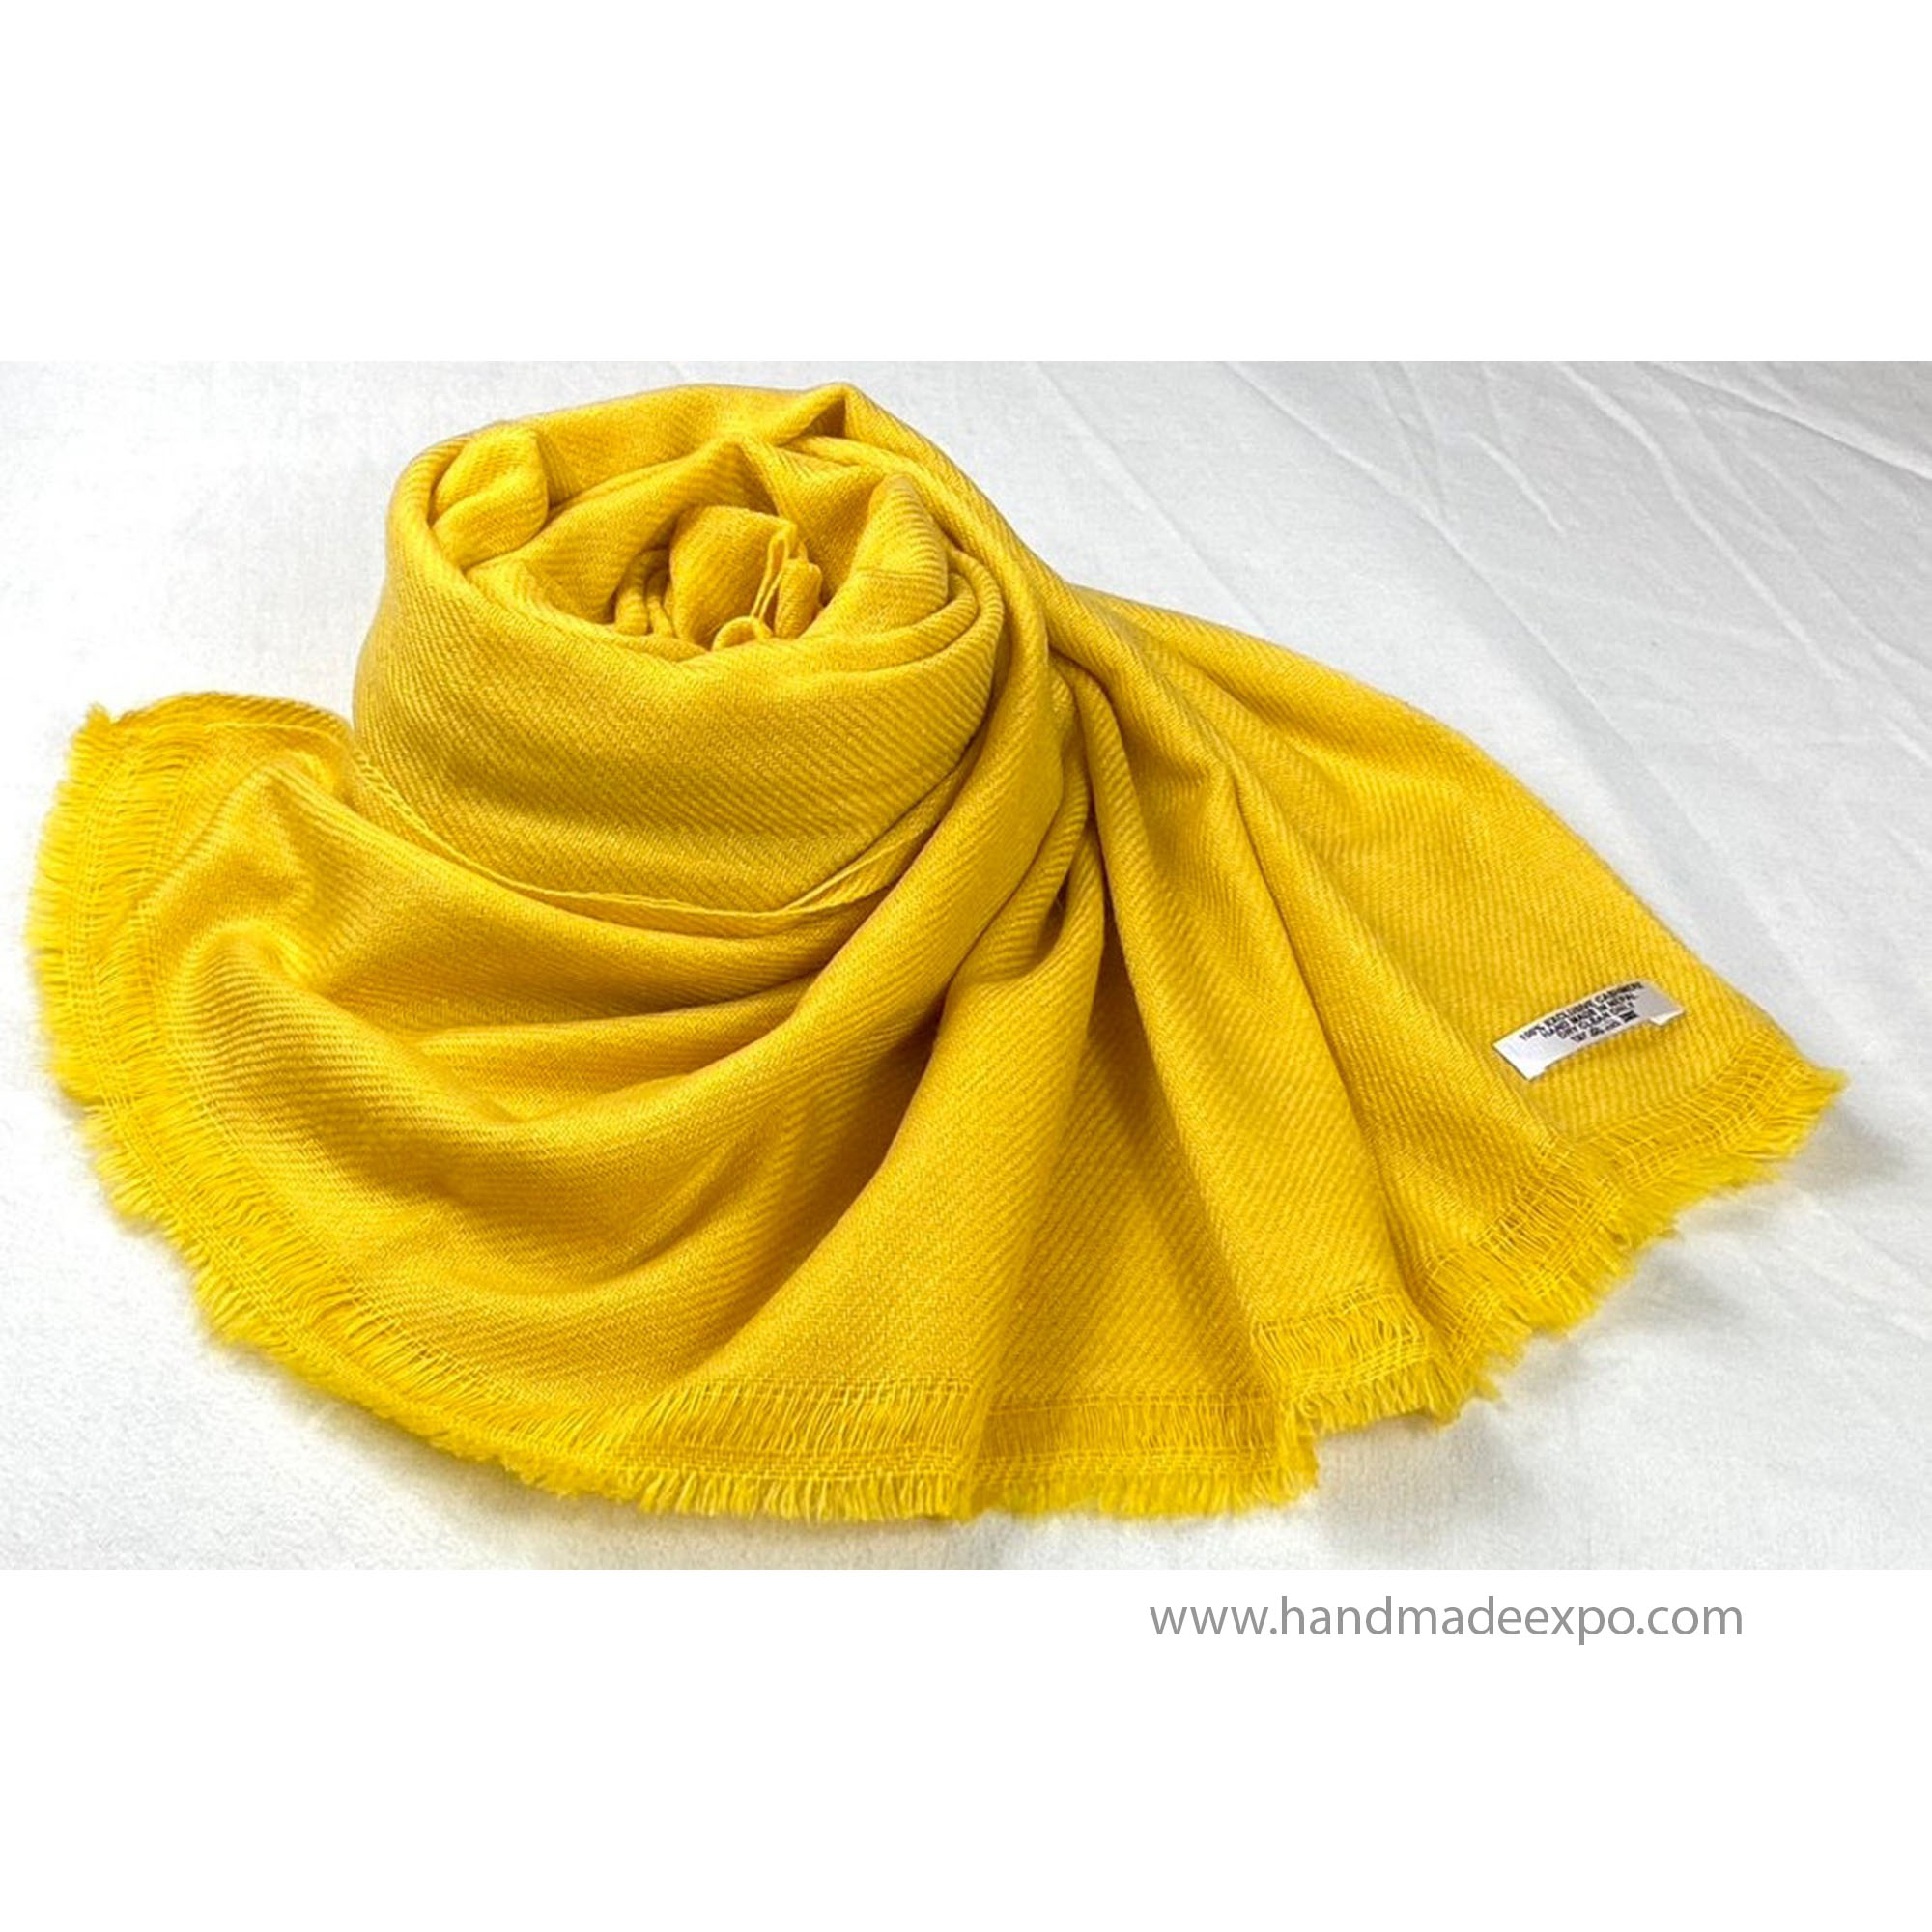 Pashmina Shawl, Nepali Handmade Shawl, In Four Ply Wool, Color Dye yellow Color